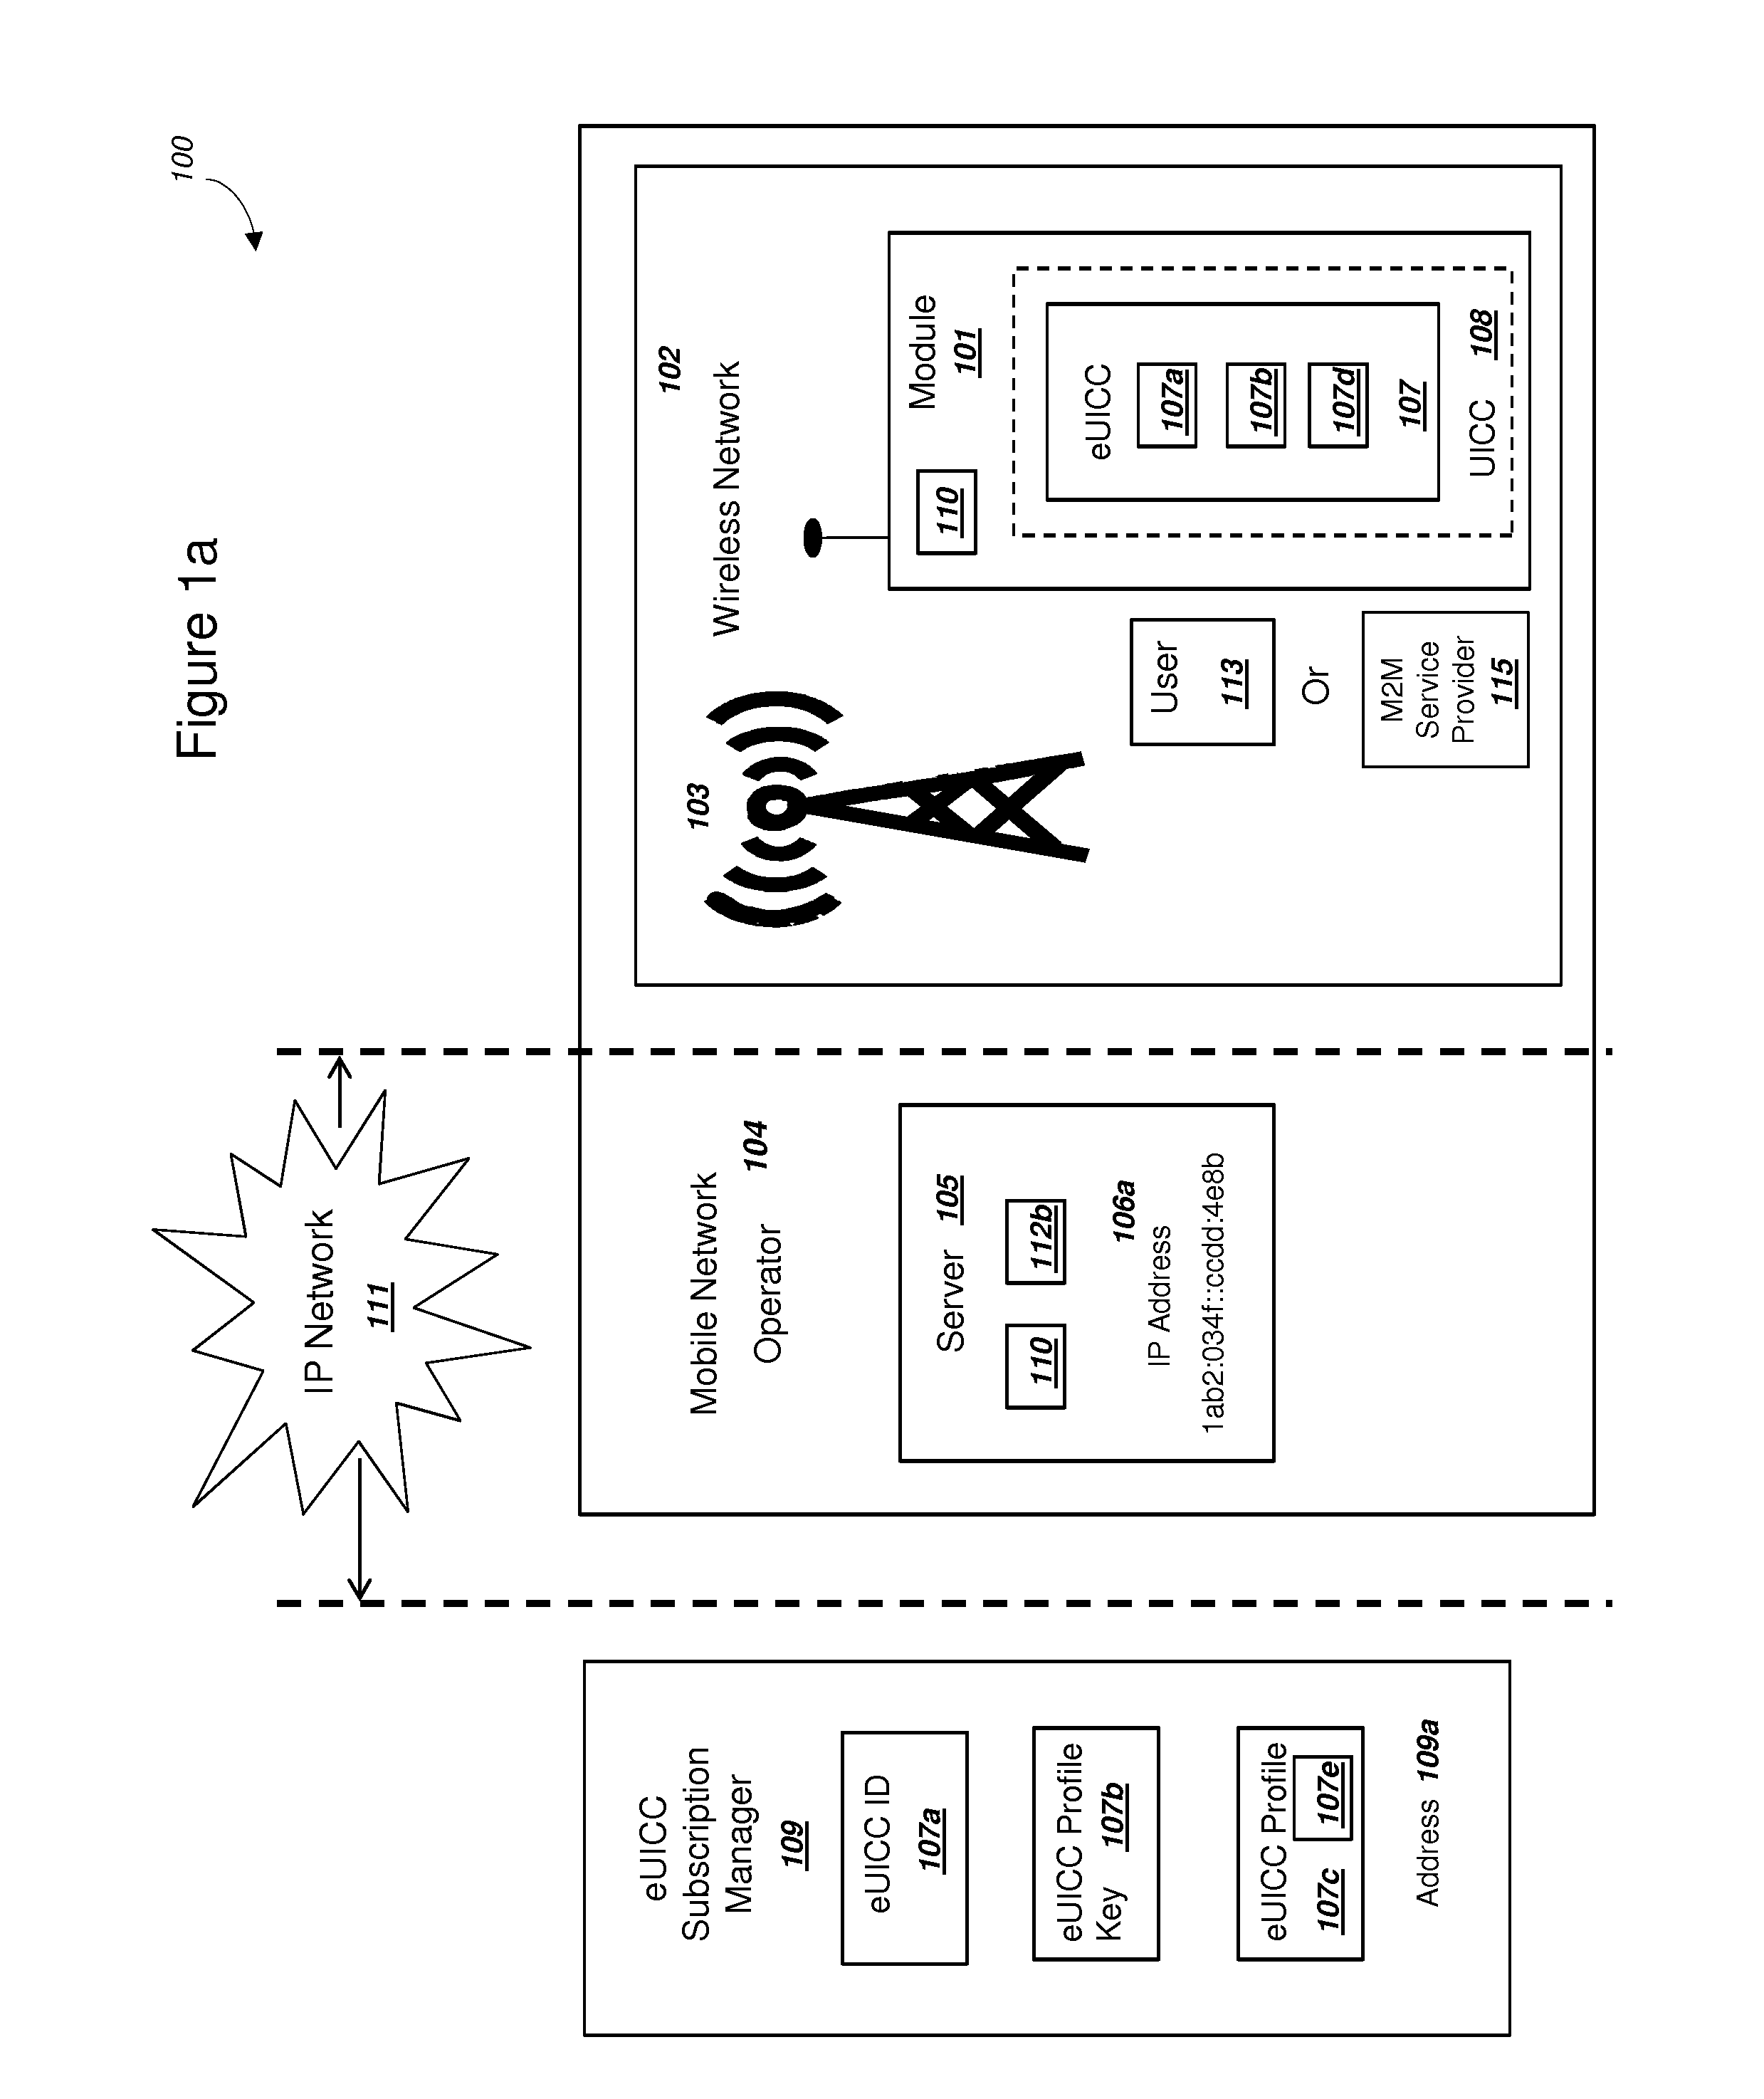 Embedded Universal Integrated Circuit Card Supporting Two-Factor Authentication